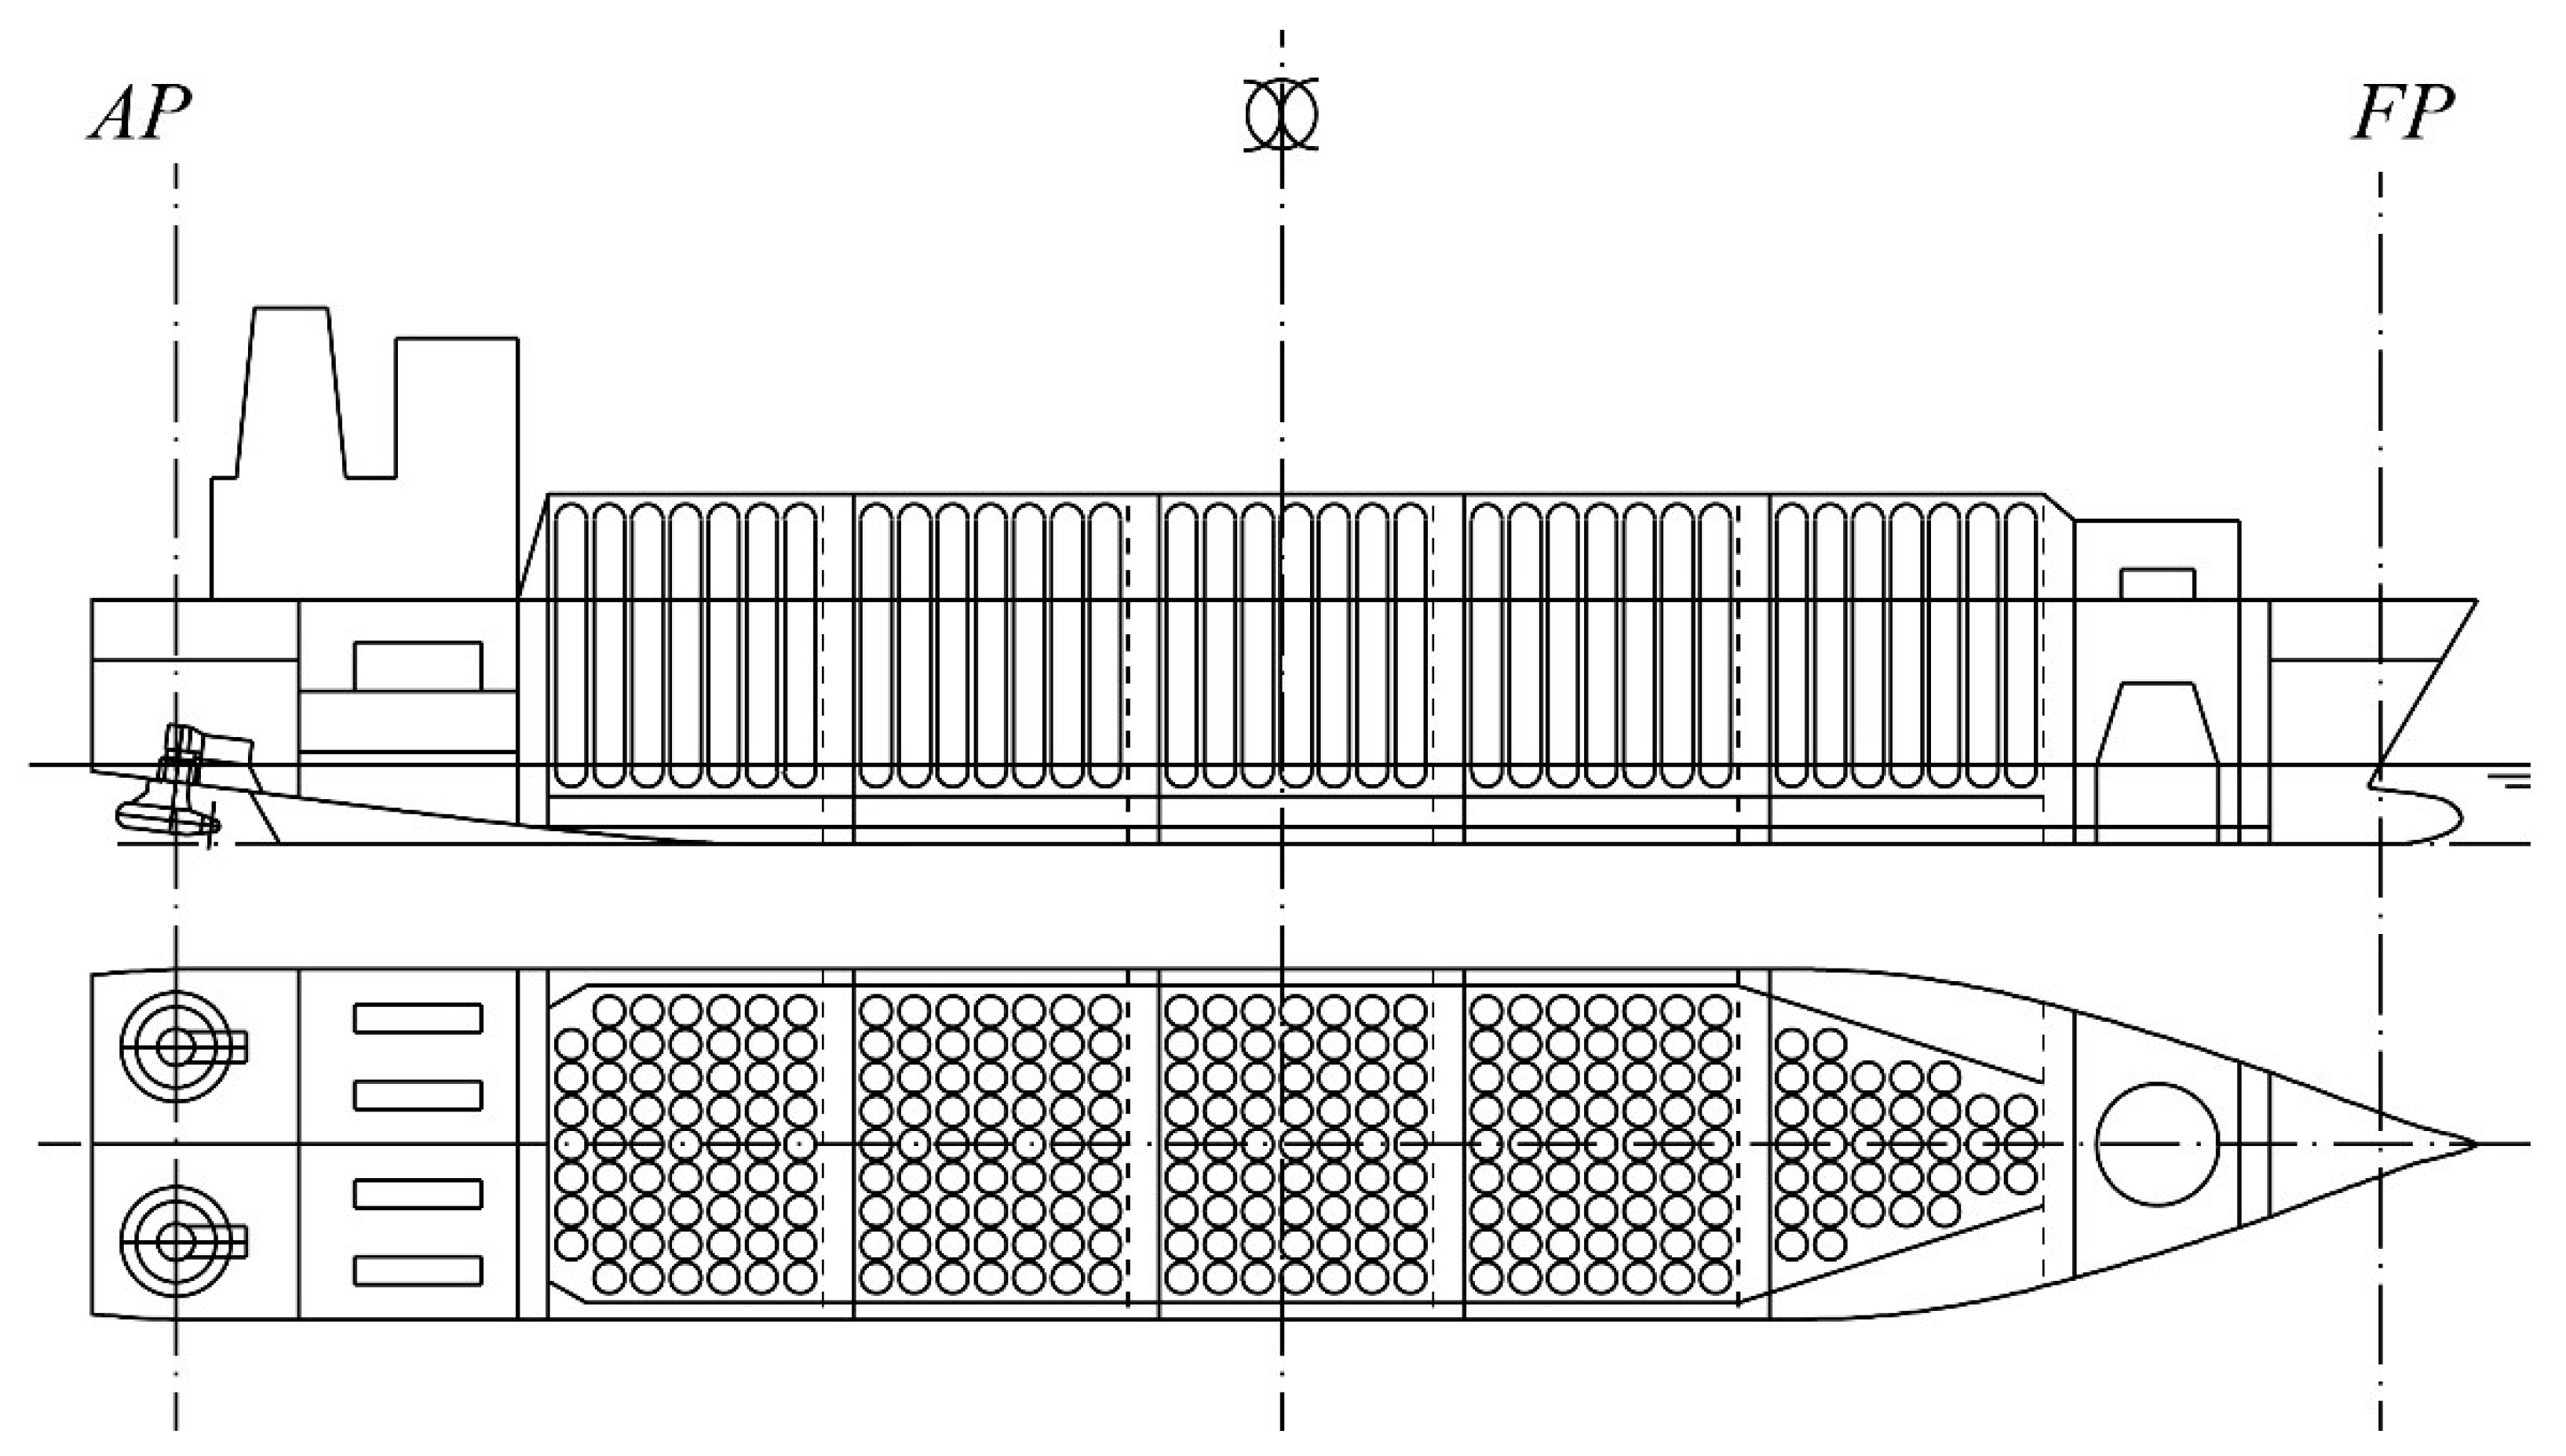 Bulkhead System for Cargo Containers